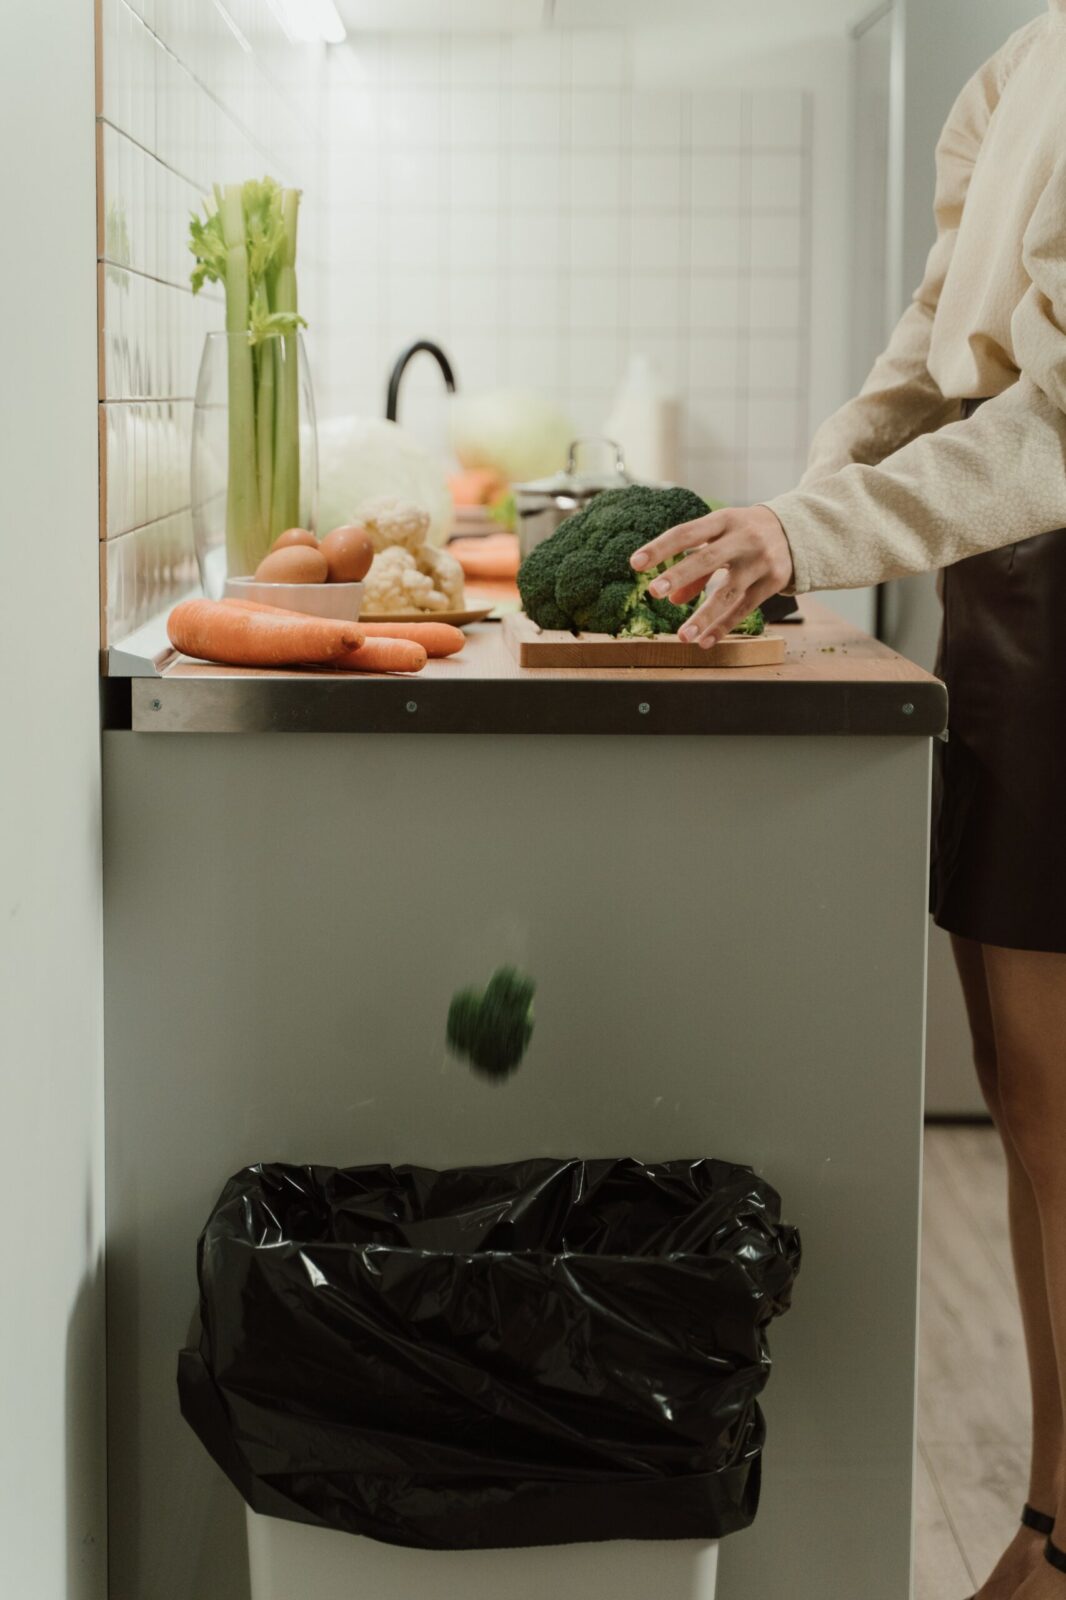 Where to Put Garbage Can in Small Kitchen?